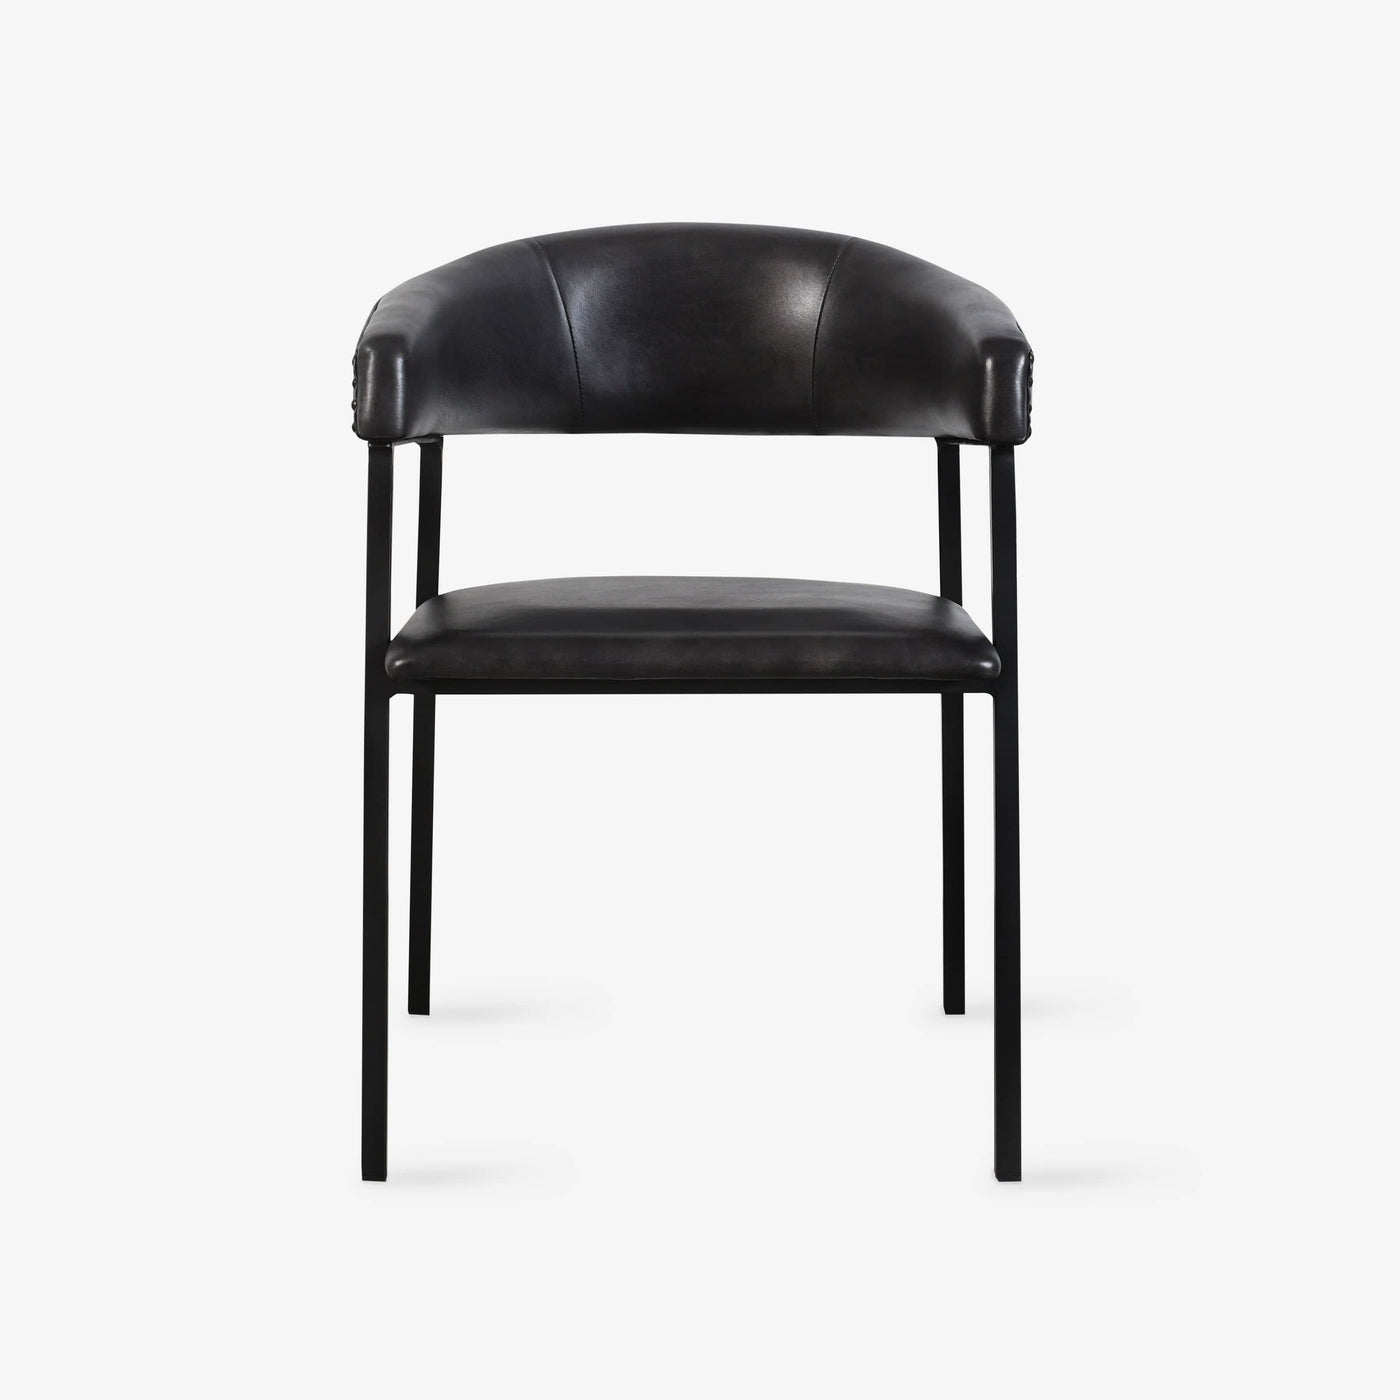 Iron Leather Accent Chair, Black, 54x58x74 cm - 1